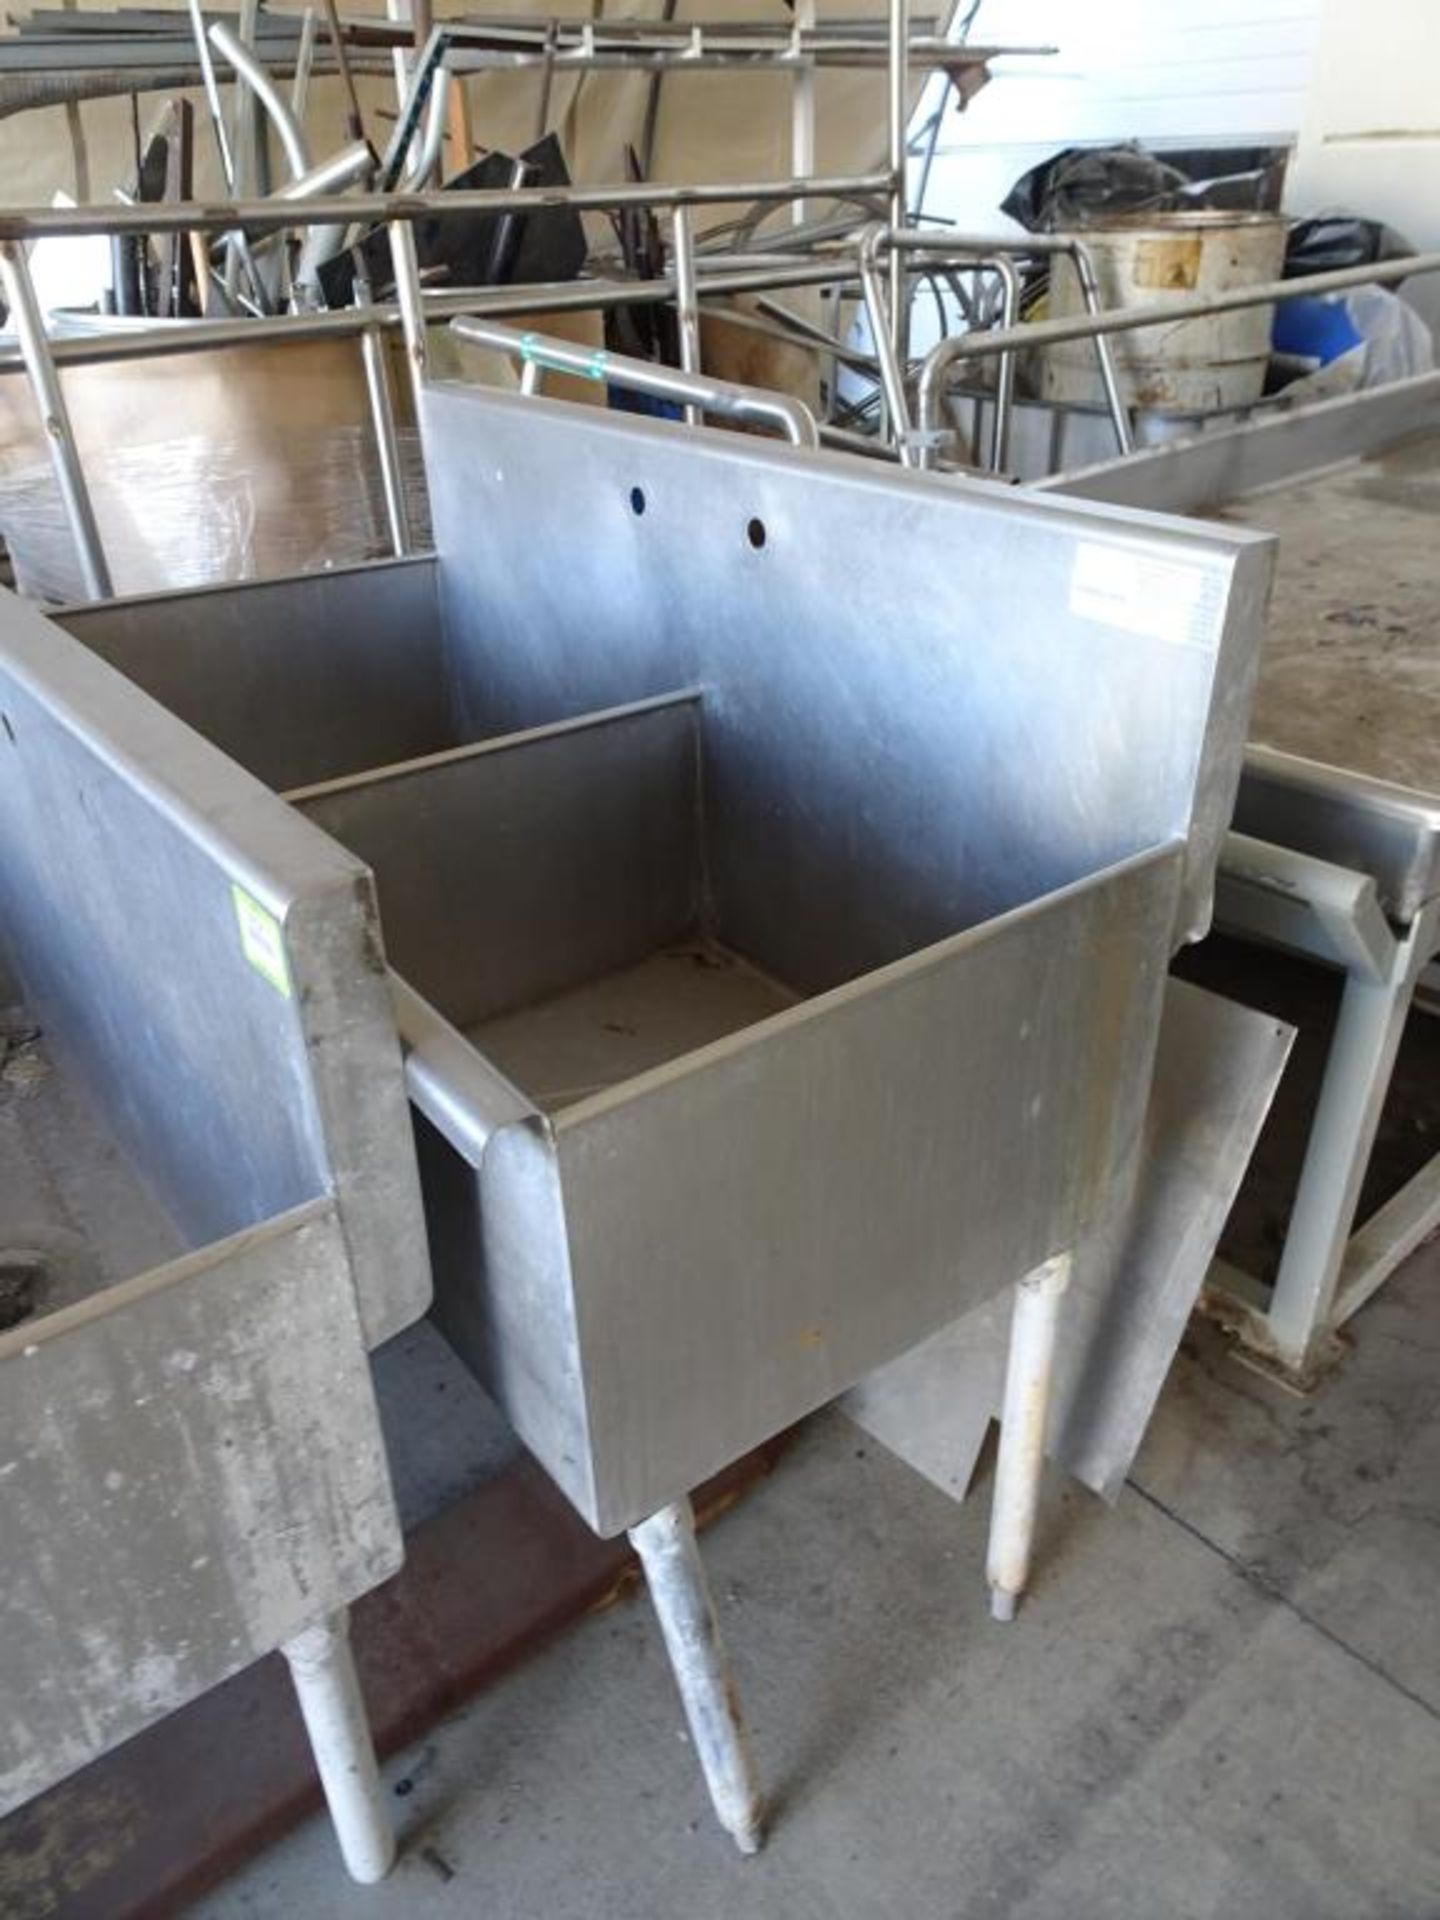 Stainless Steel Shop Sinks - Image 3 of 4